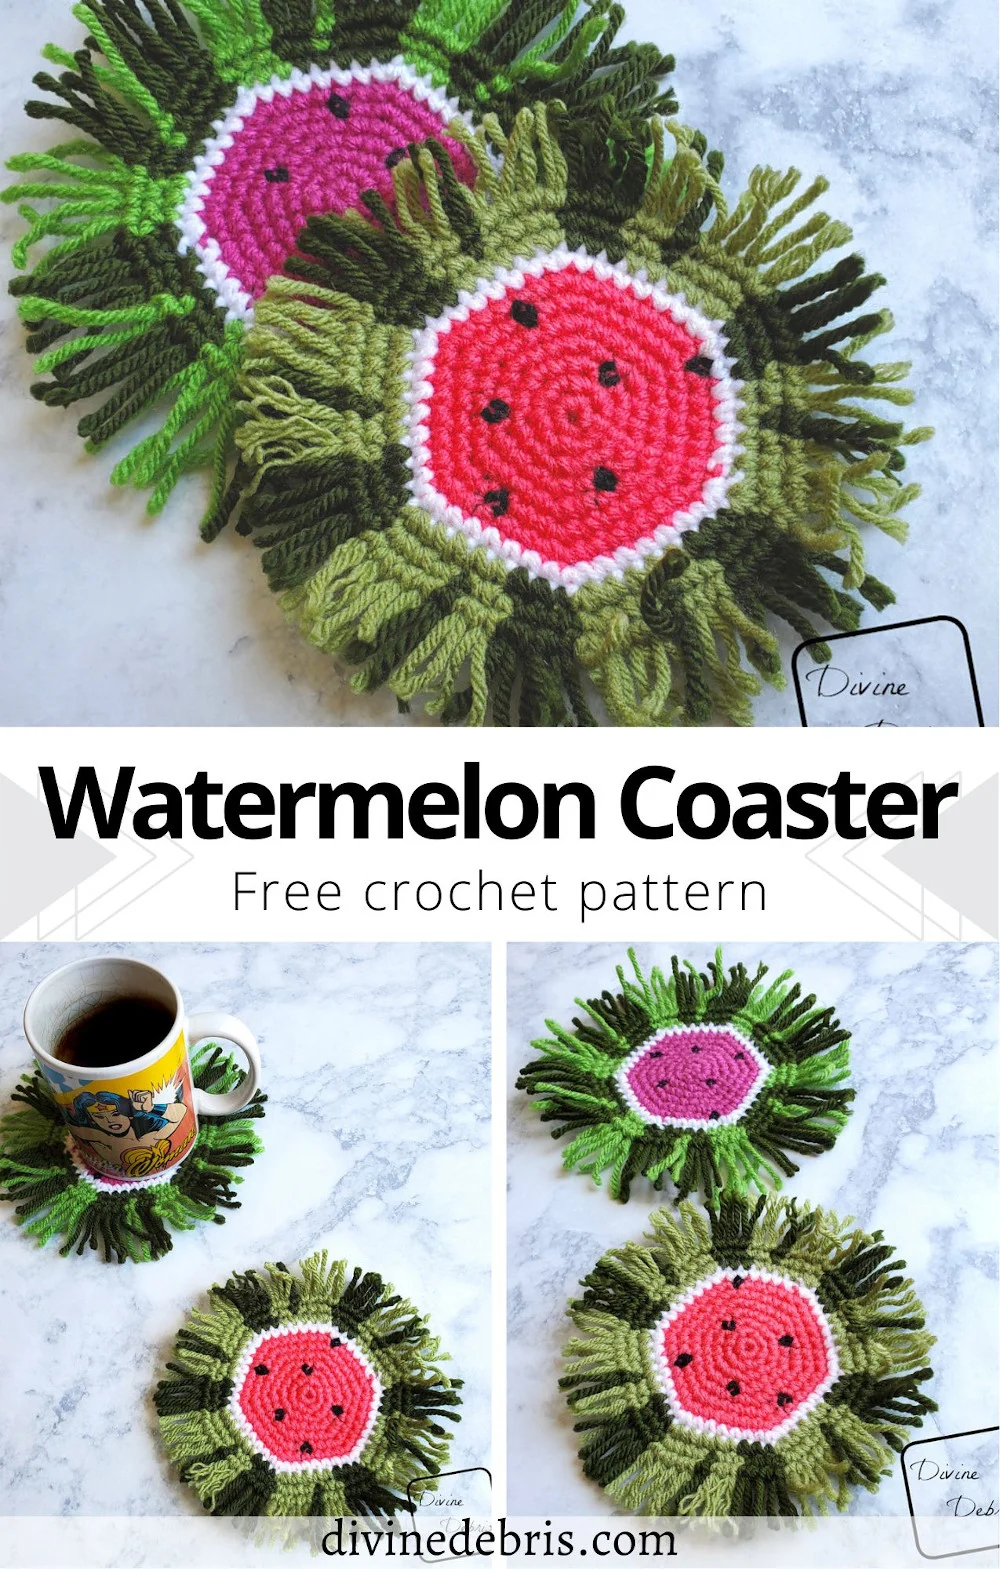 Update your Summer home decor with this fun and stash-busting free crochet pattern, the Watermelon Coaster with fringe, by DivineDebris.com